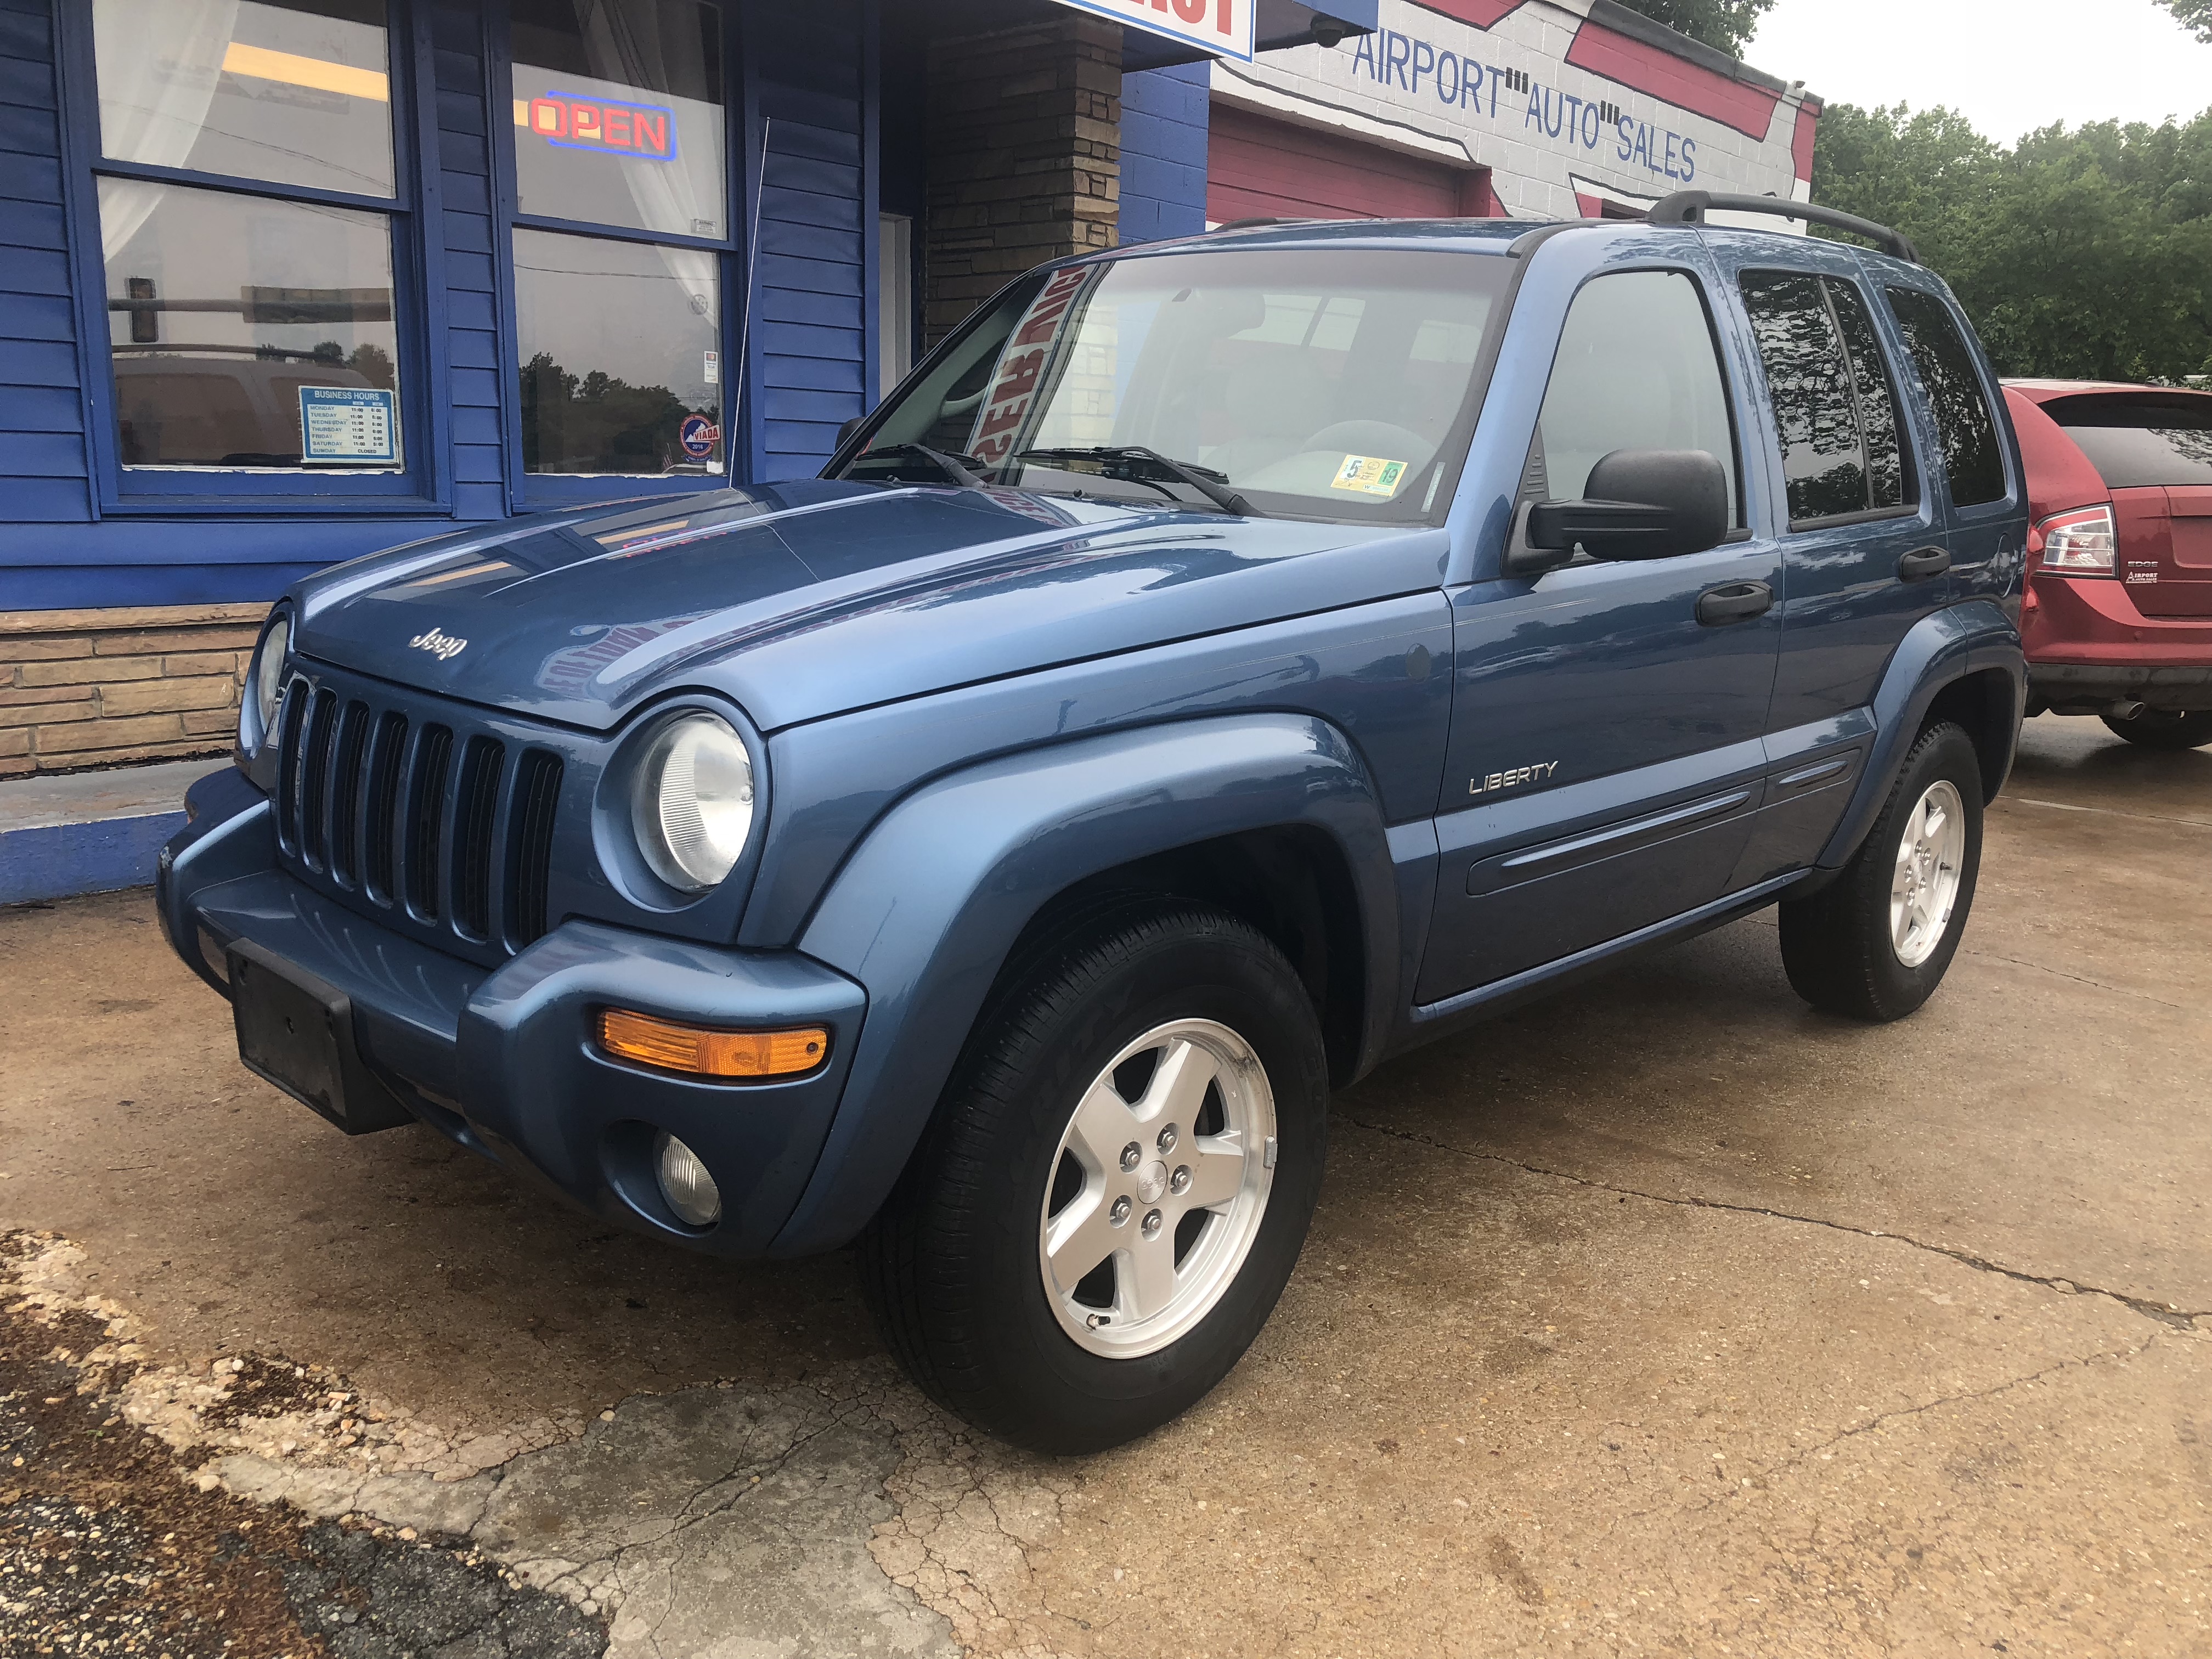 2004 Jeep Liberty 4WD, Airport Auto Sales Used Cars for